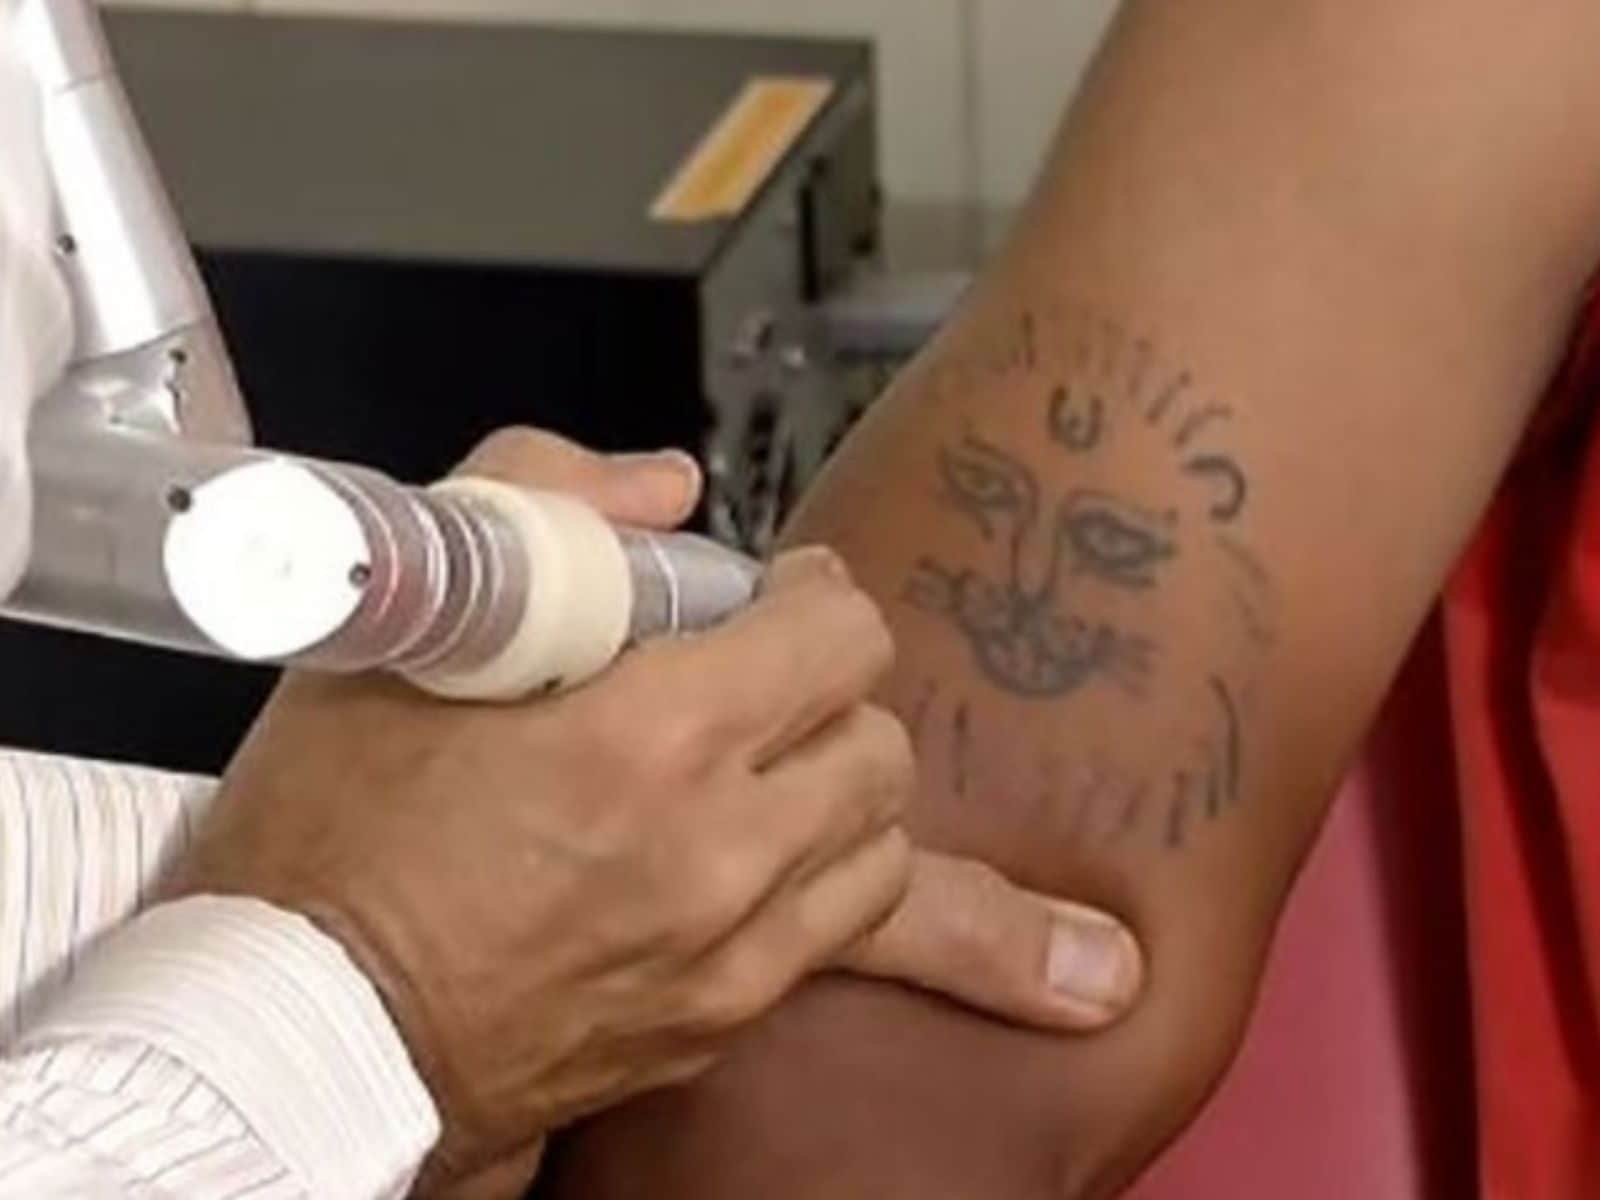 Tattoo removal on the increase in Spain in the battle for jobs  Spain   The Guardian